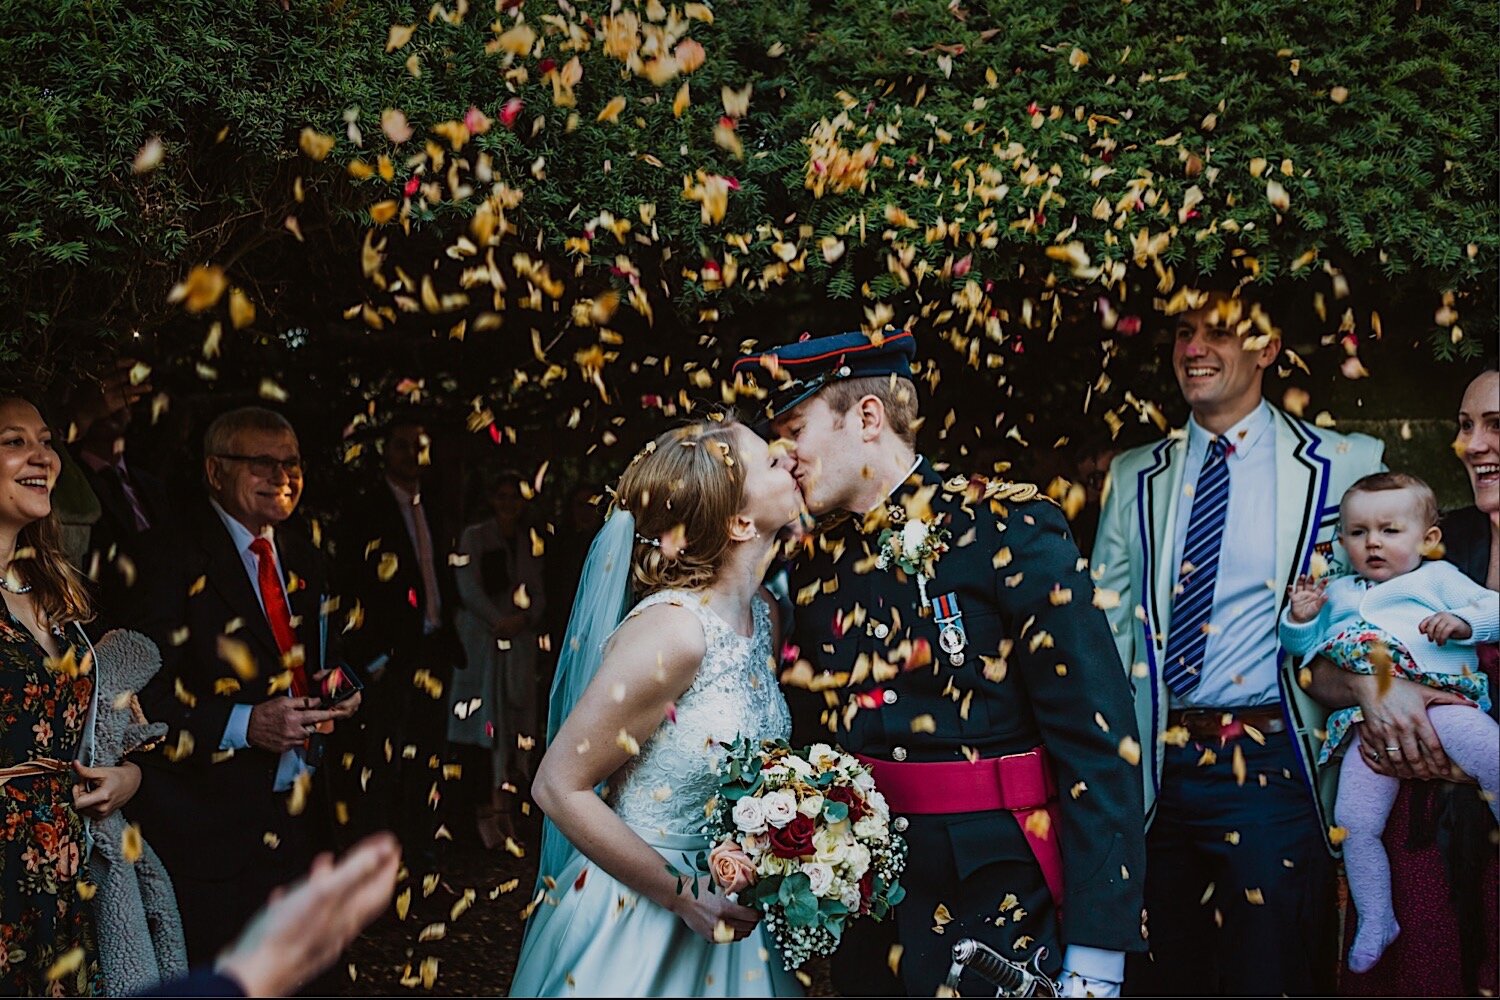 065_TWS-685_bride_groom_photography_guard_henley_oxfordshire_millitary_of_crooked_wedding_confetti_honour_winter_billet.jpg